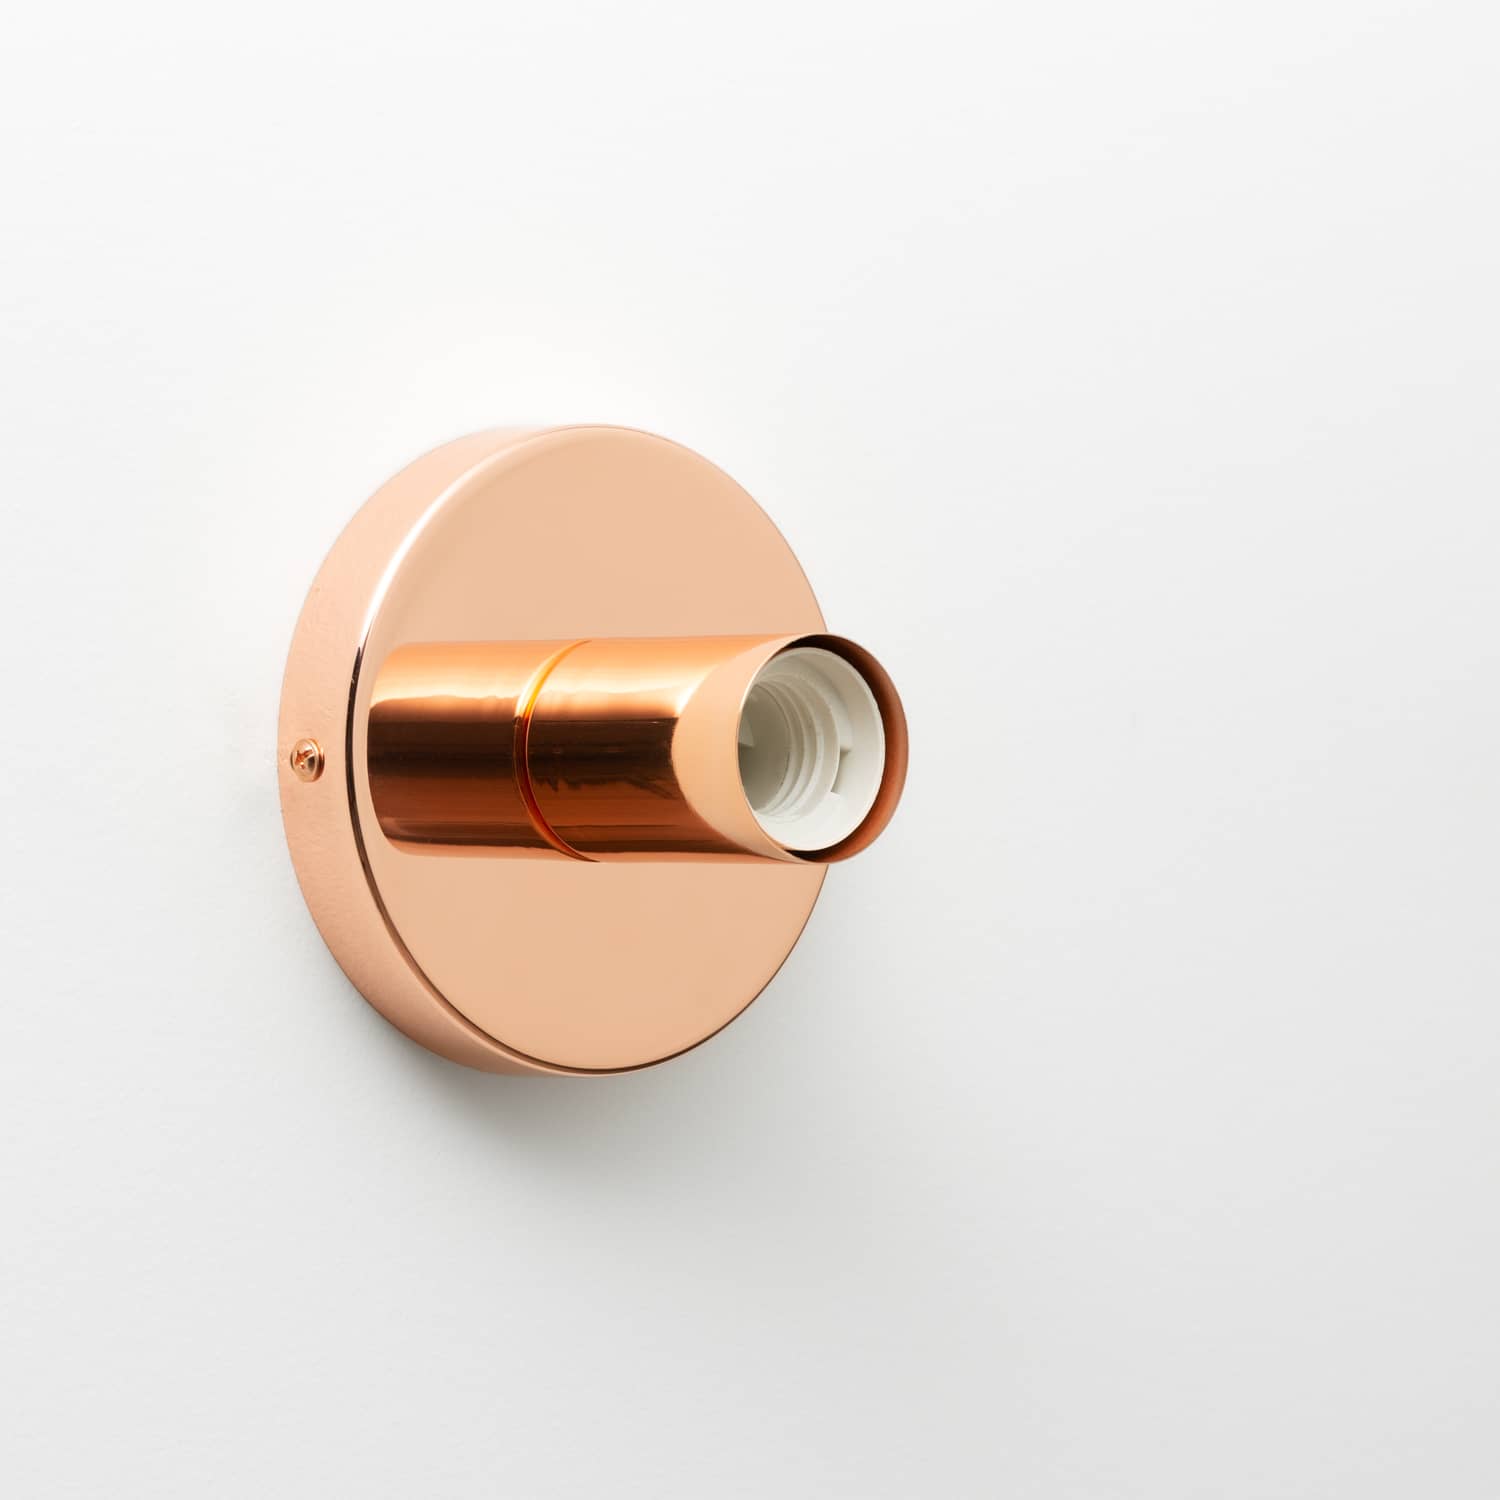 Button Light in Polished Copper finish